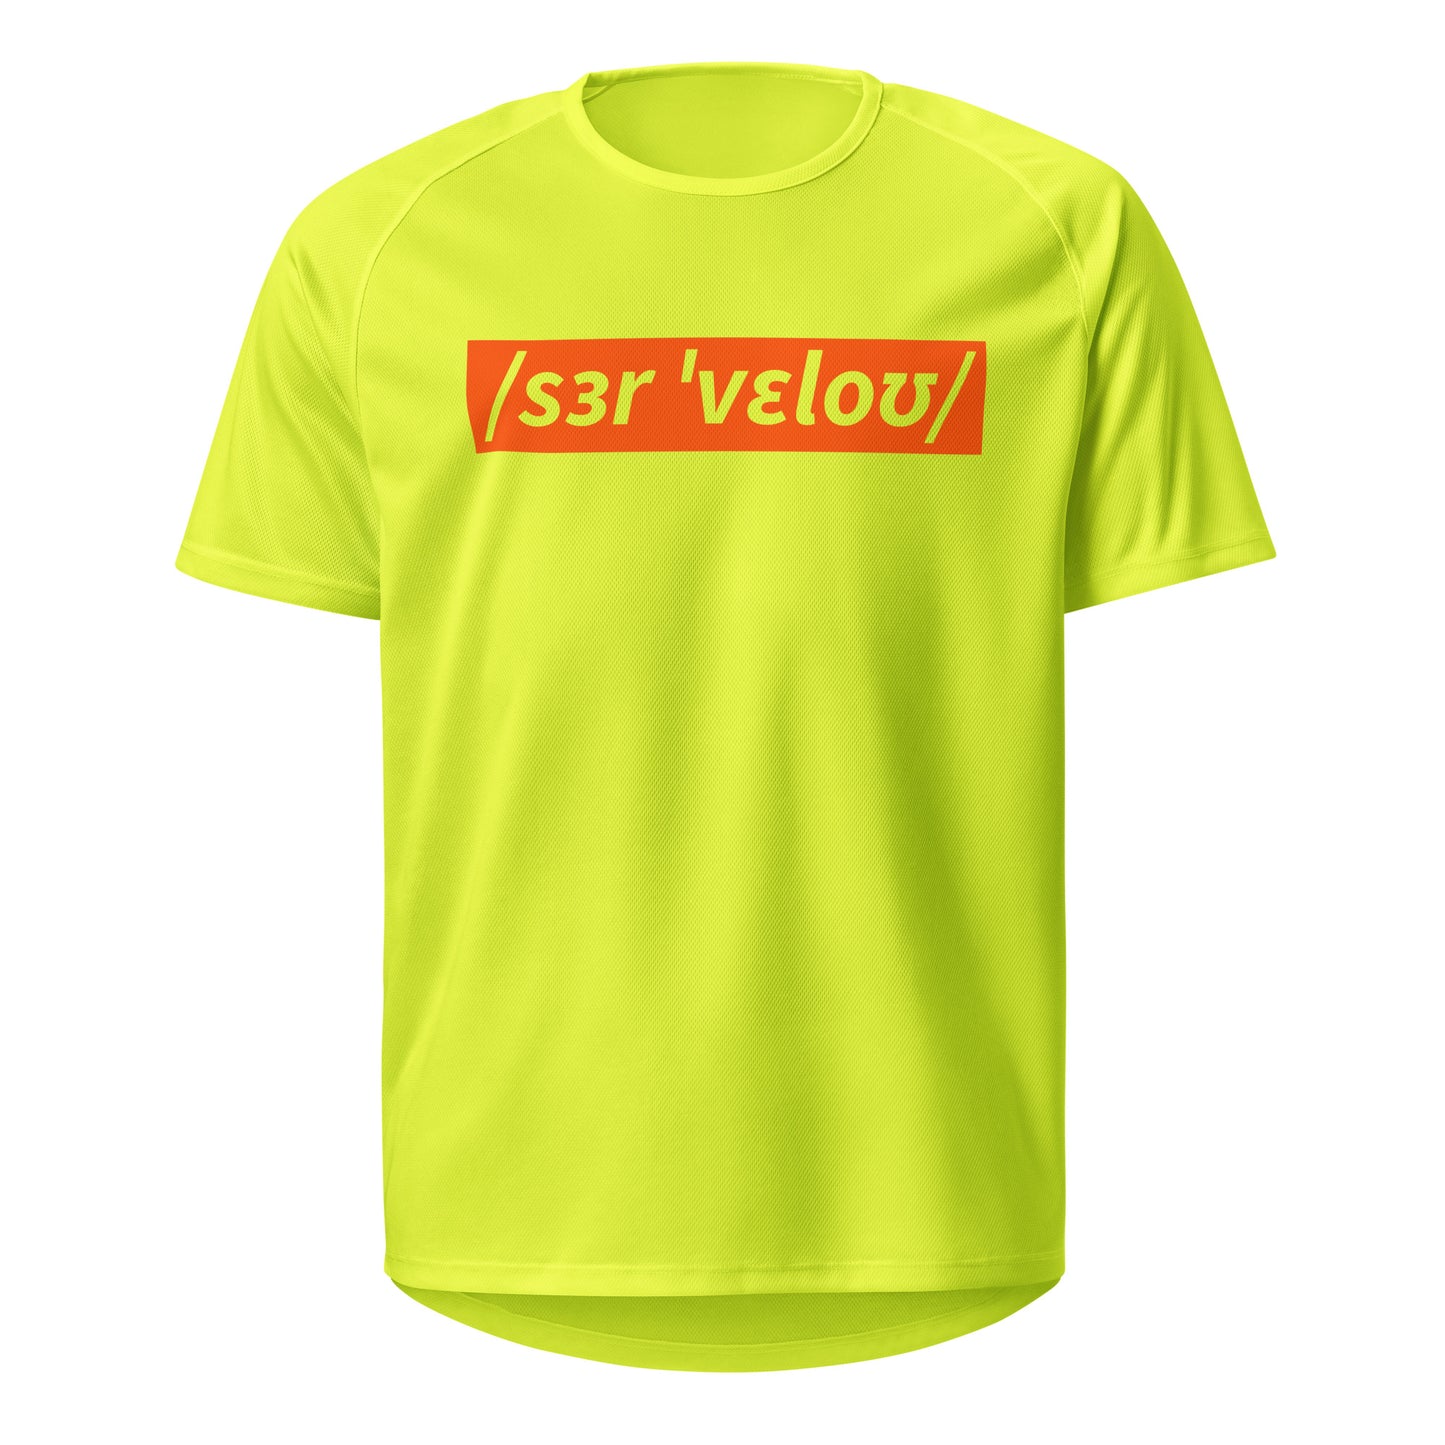 Sir Velo Sports Jersey, Adult Cyclist